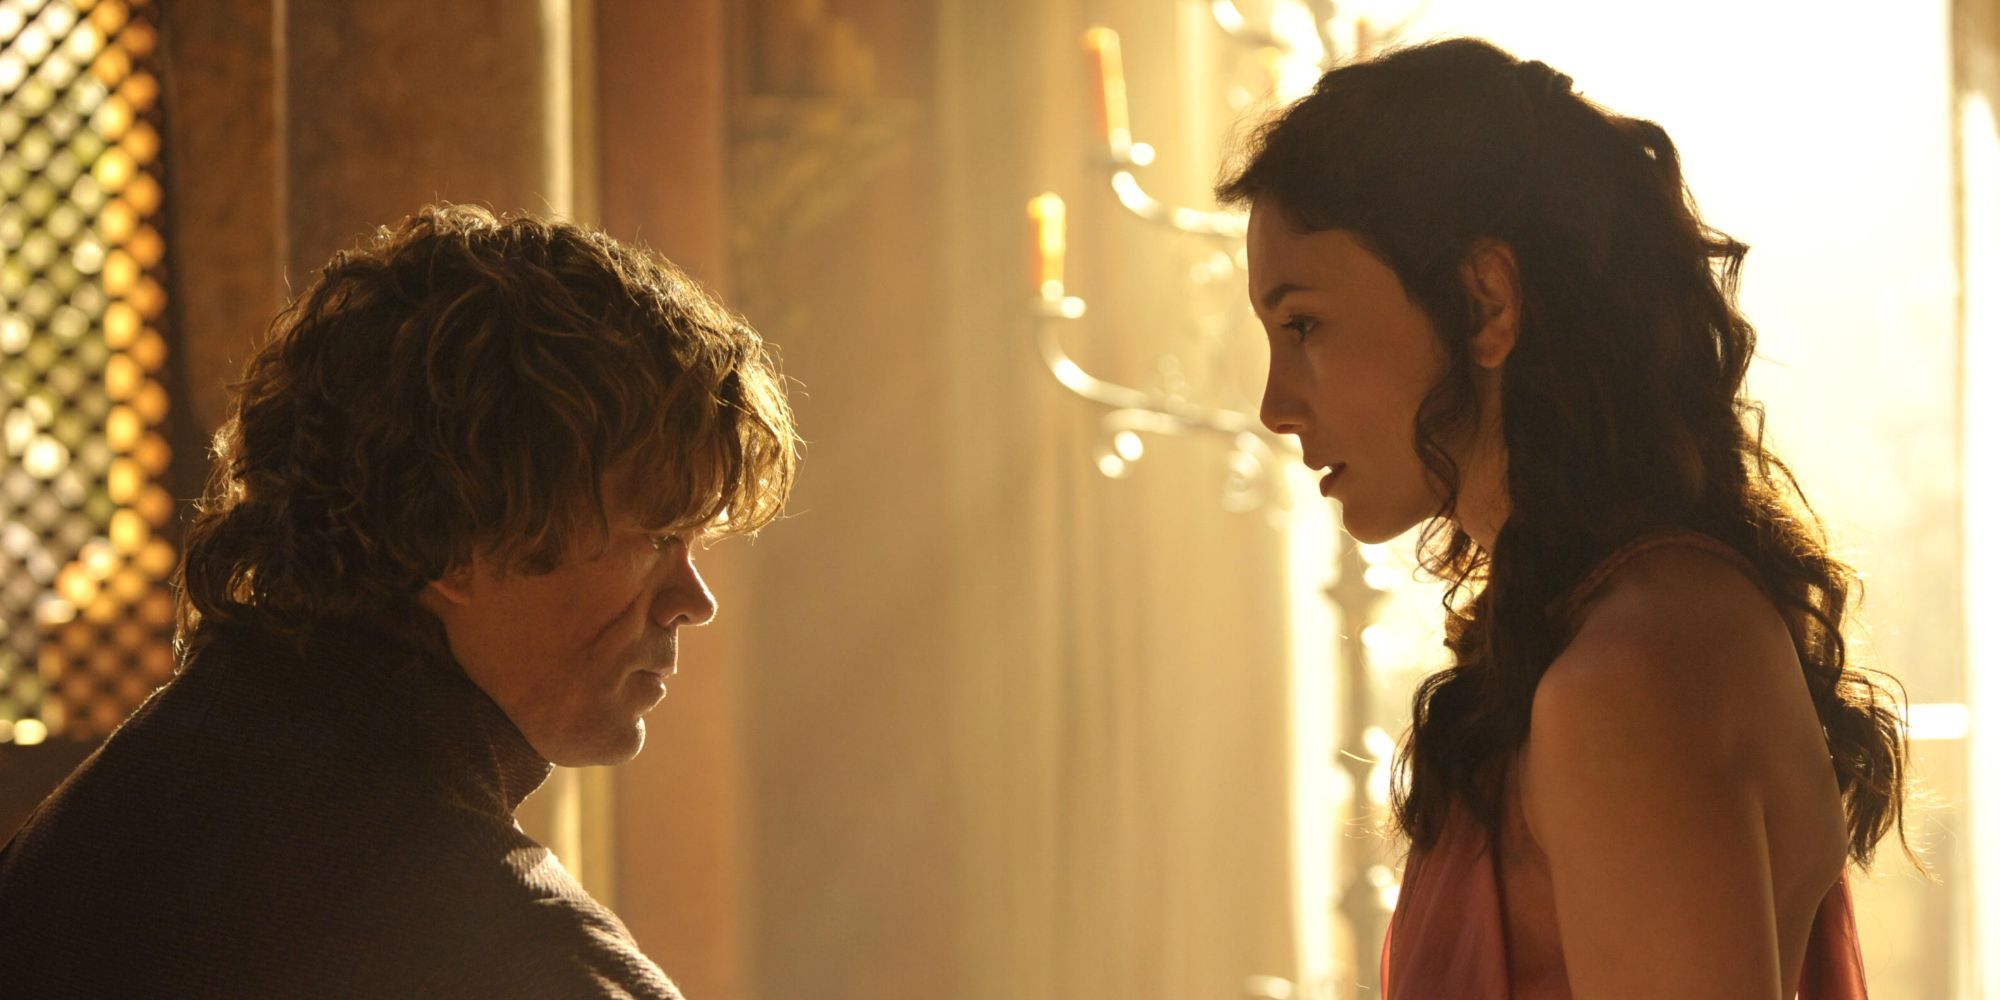 Tyrion and Shae sharing a conversation in a bedroom with the sun shining behind them in Game of Thrones